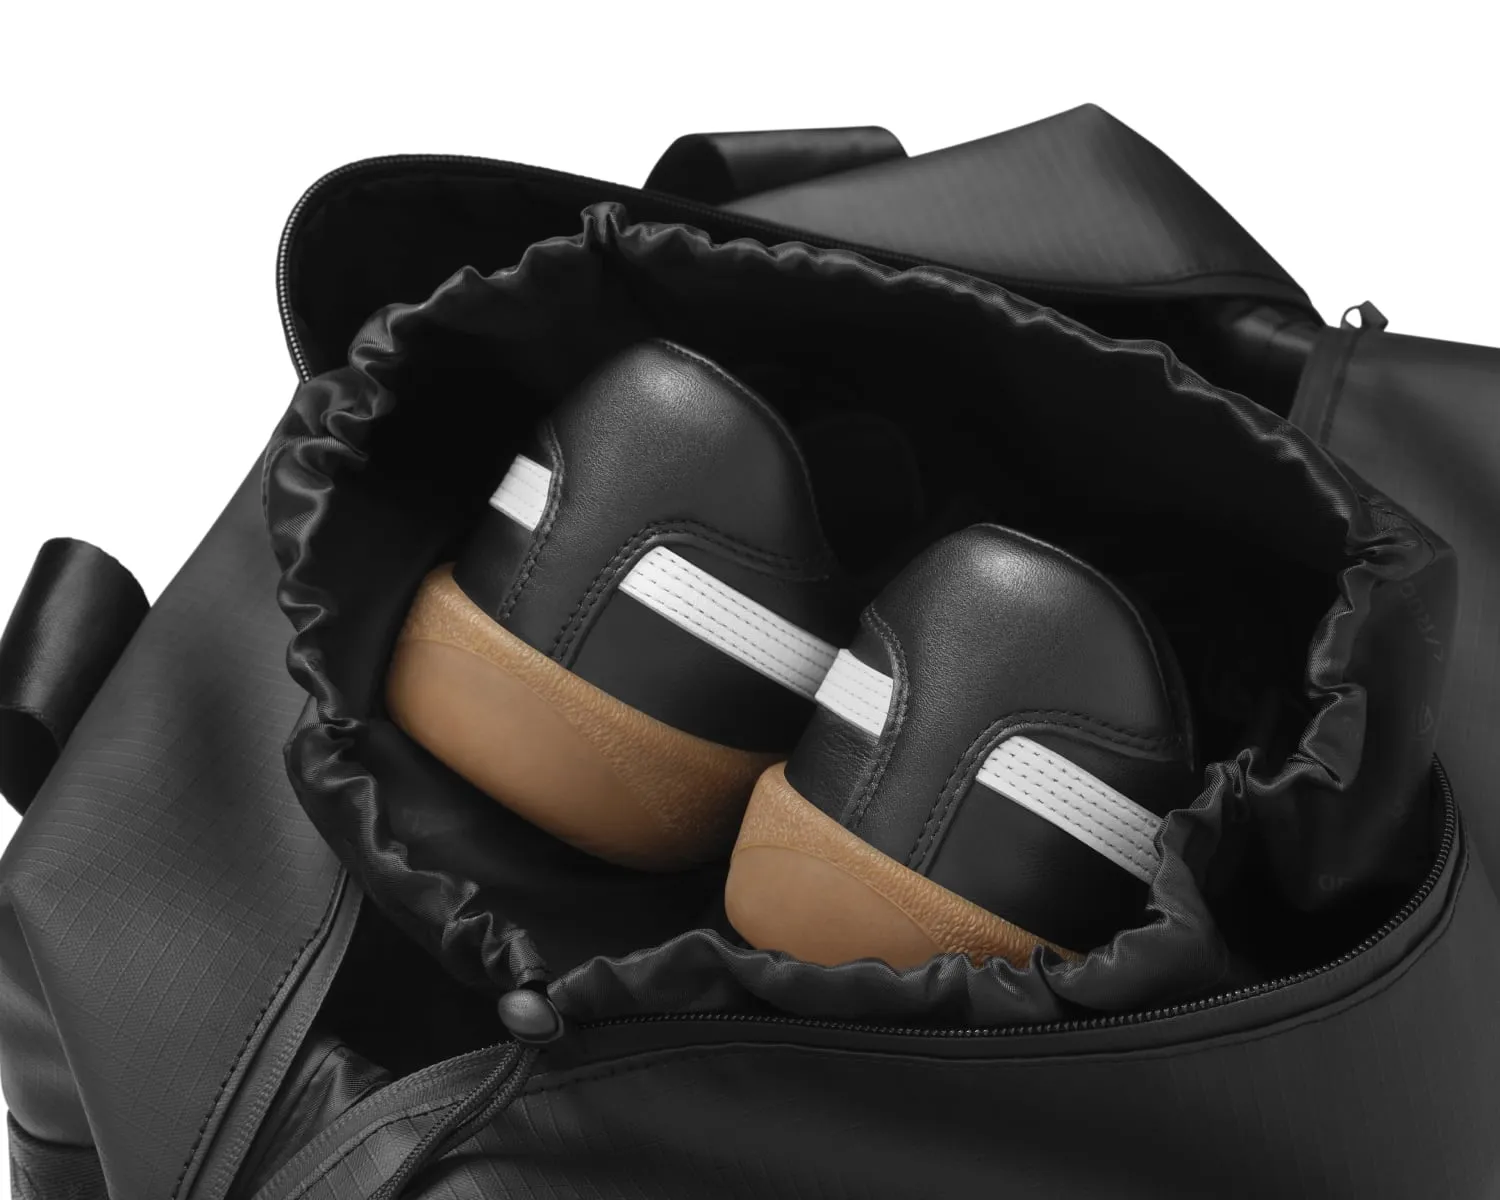 View of the removable shoe compartment of the ROG SLASH Duffle Bag